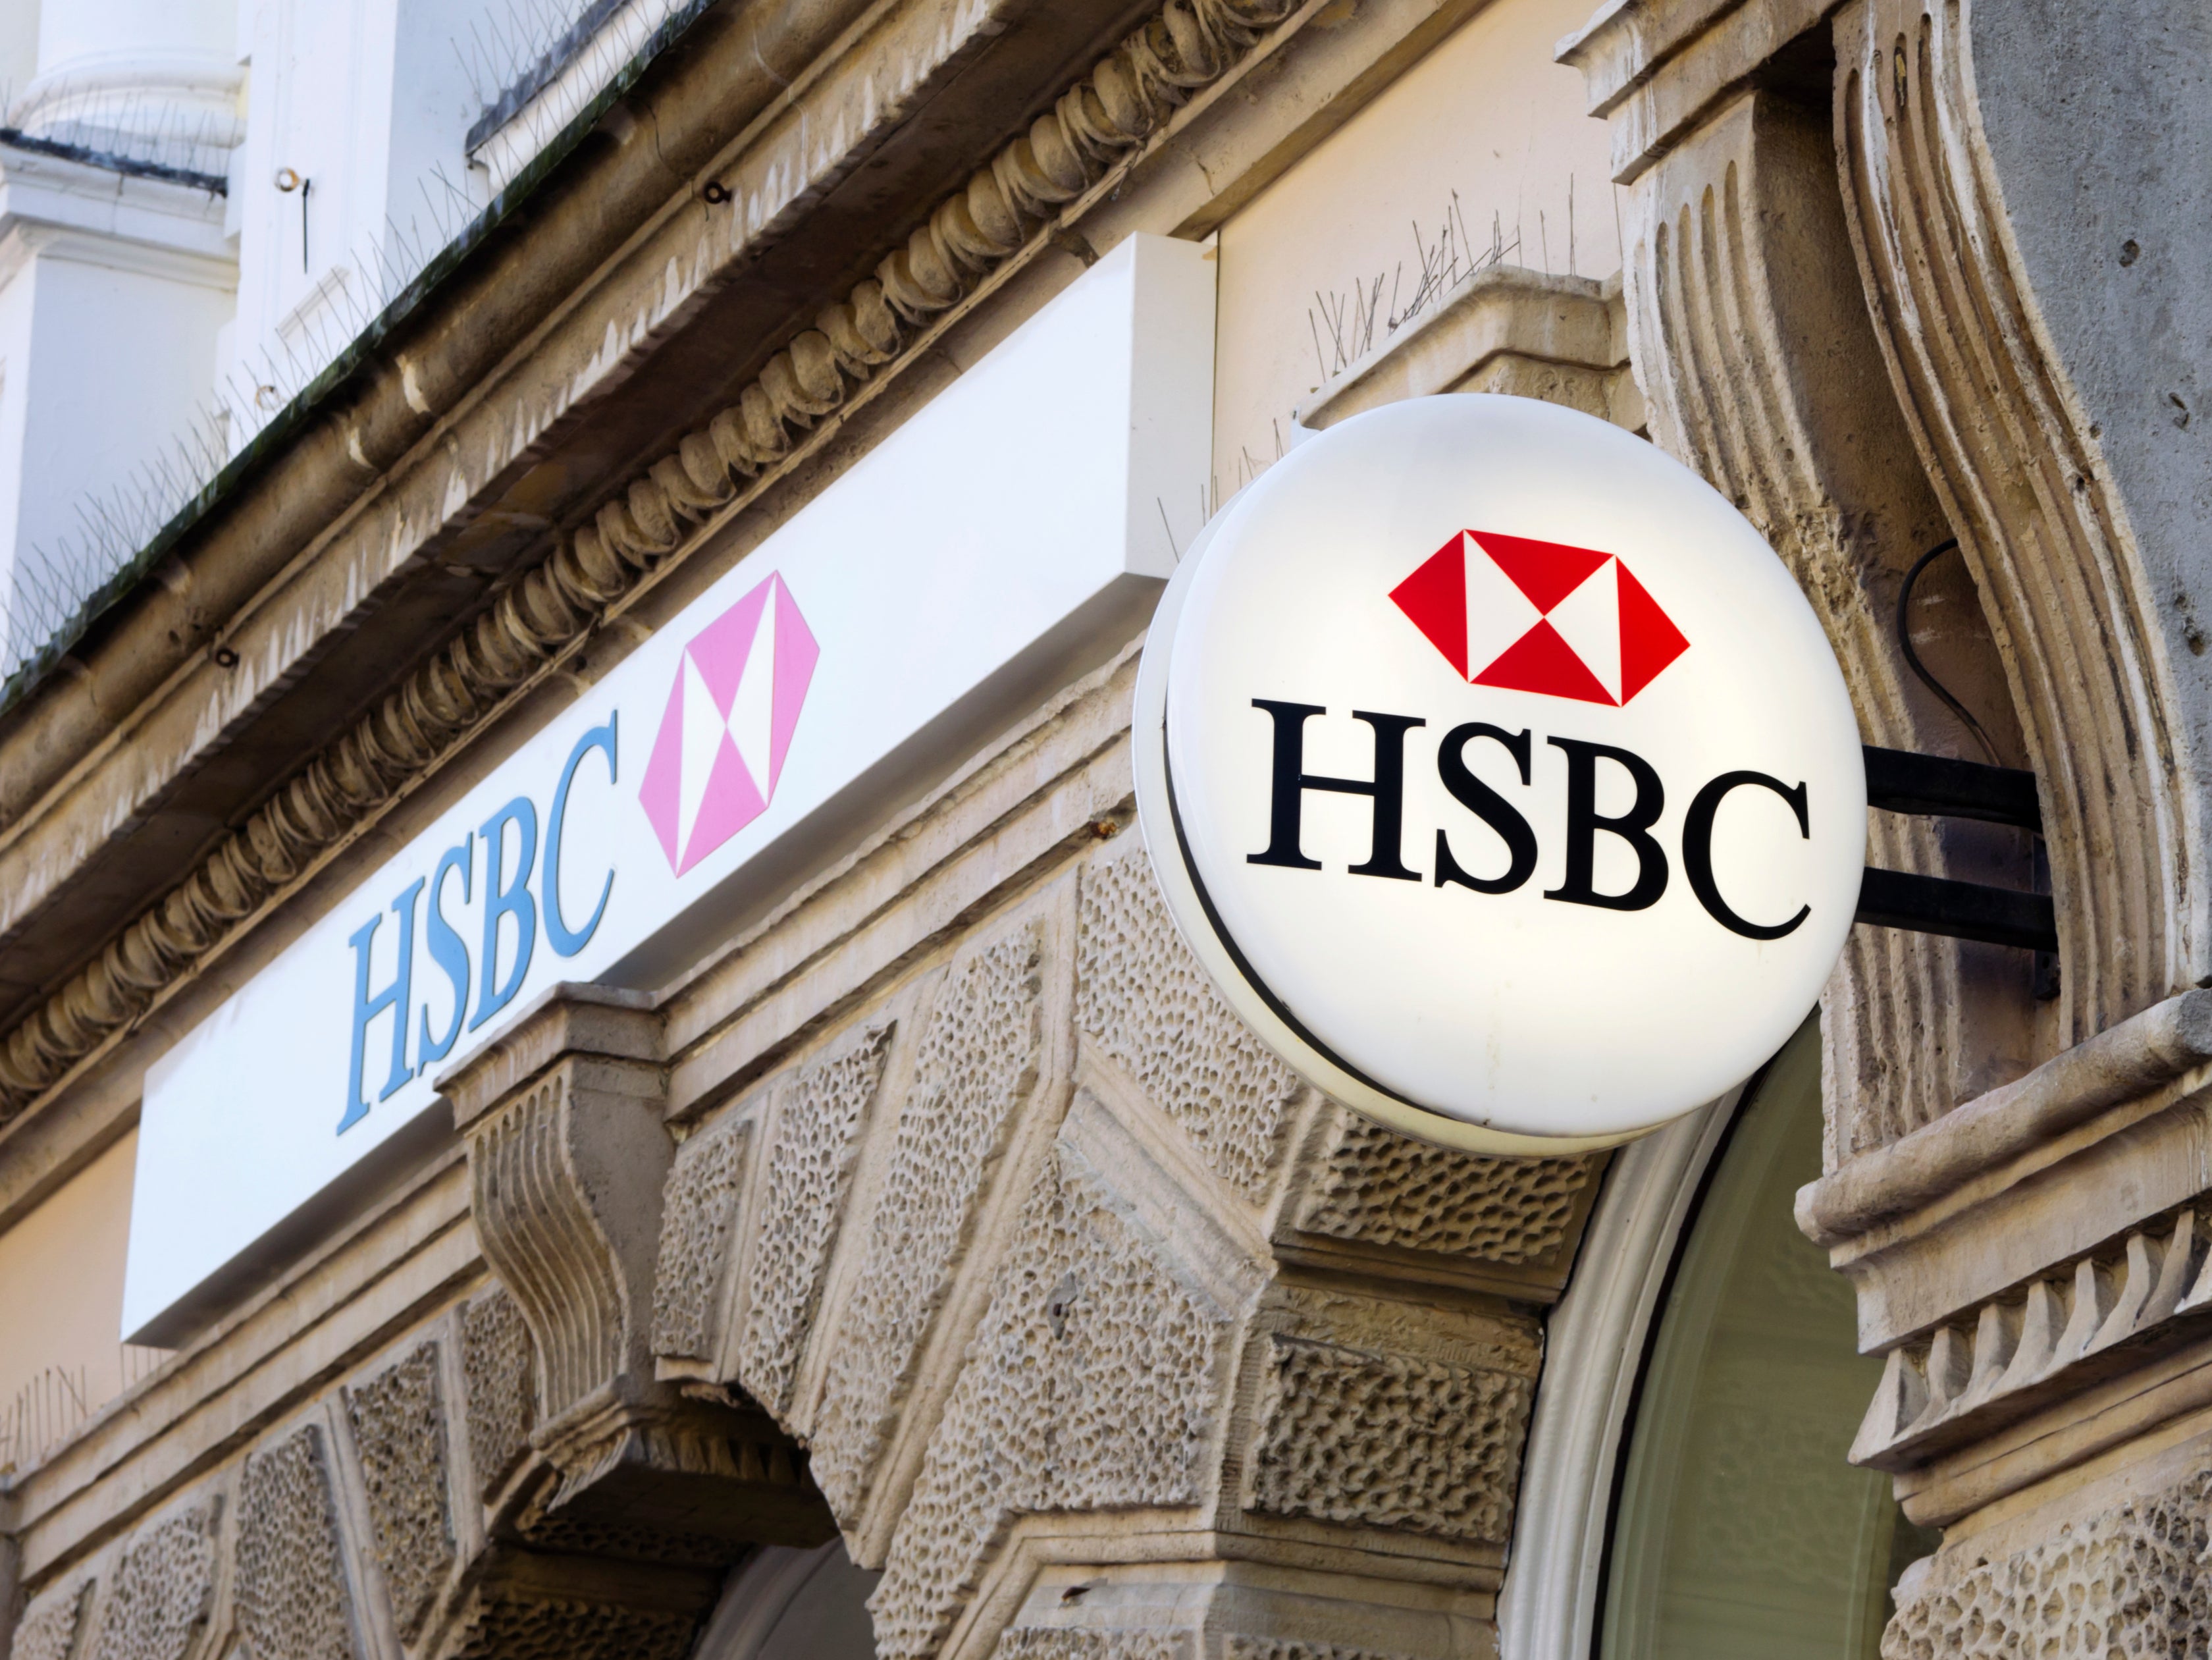 HSBC, headquartered in London, has not yet said it is severing ties with Russian oil firms it has shares in